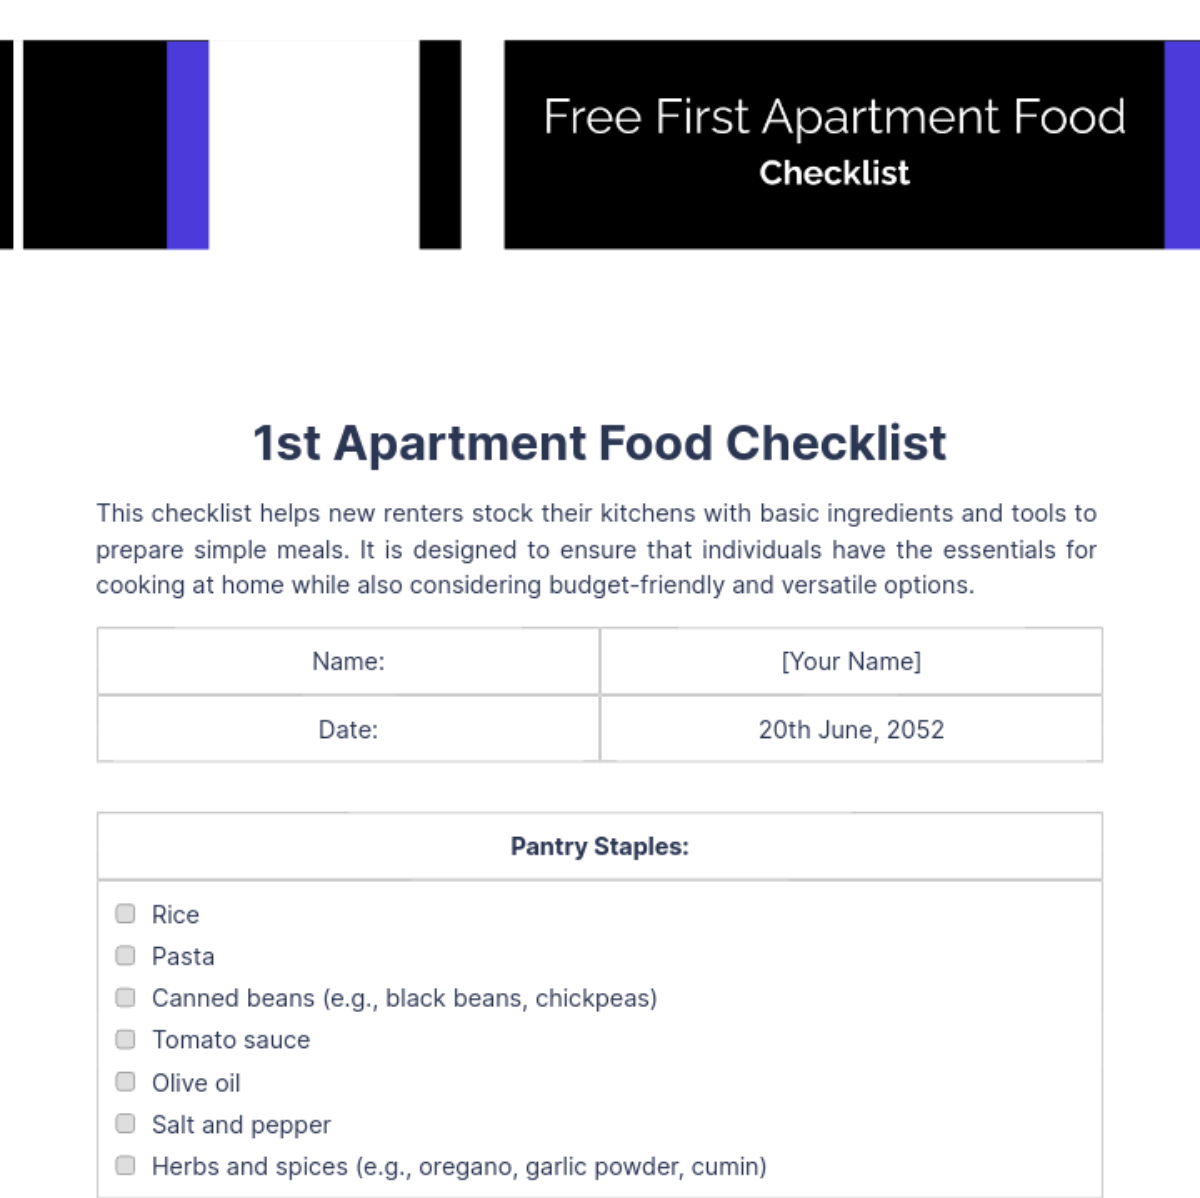 Free First Apartment Food Checklist Template